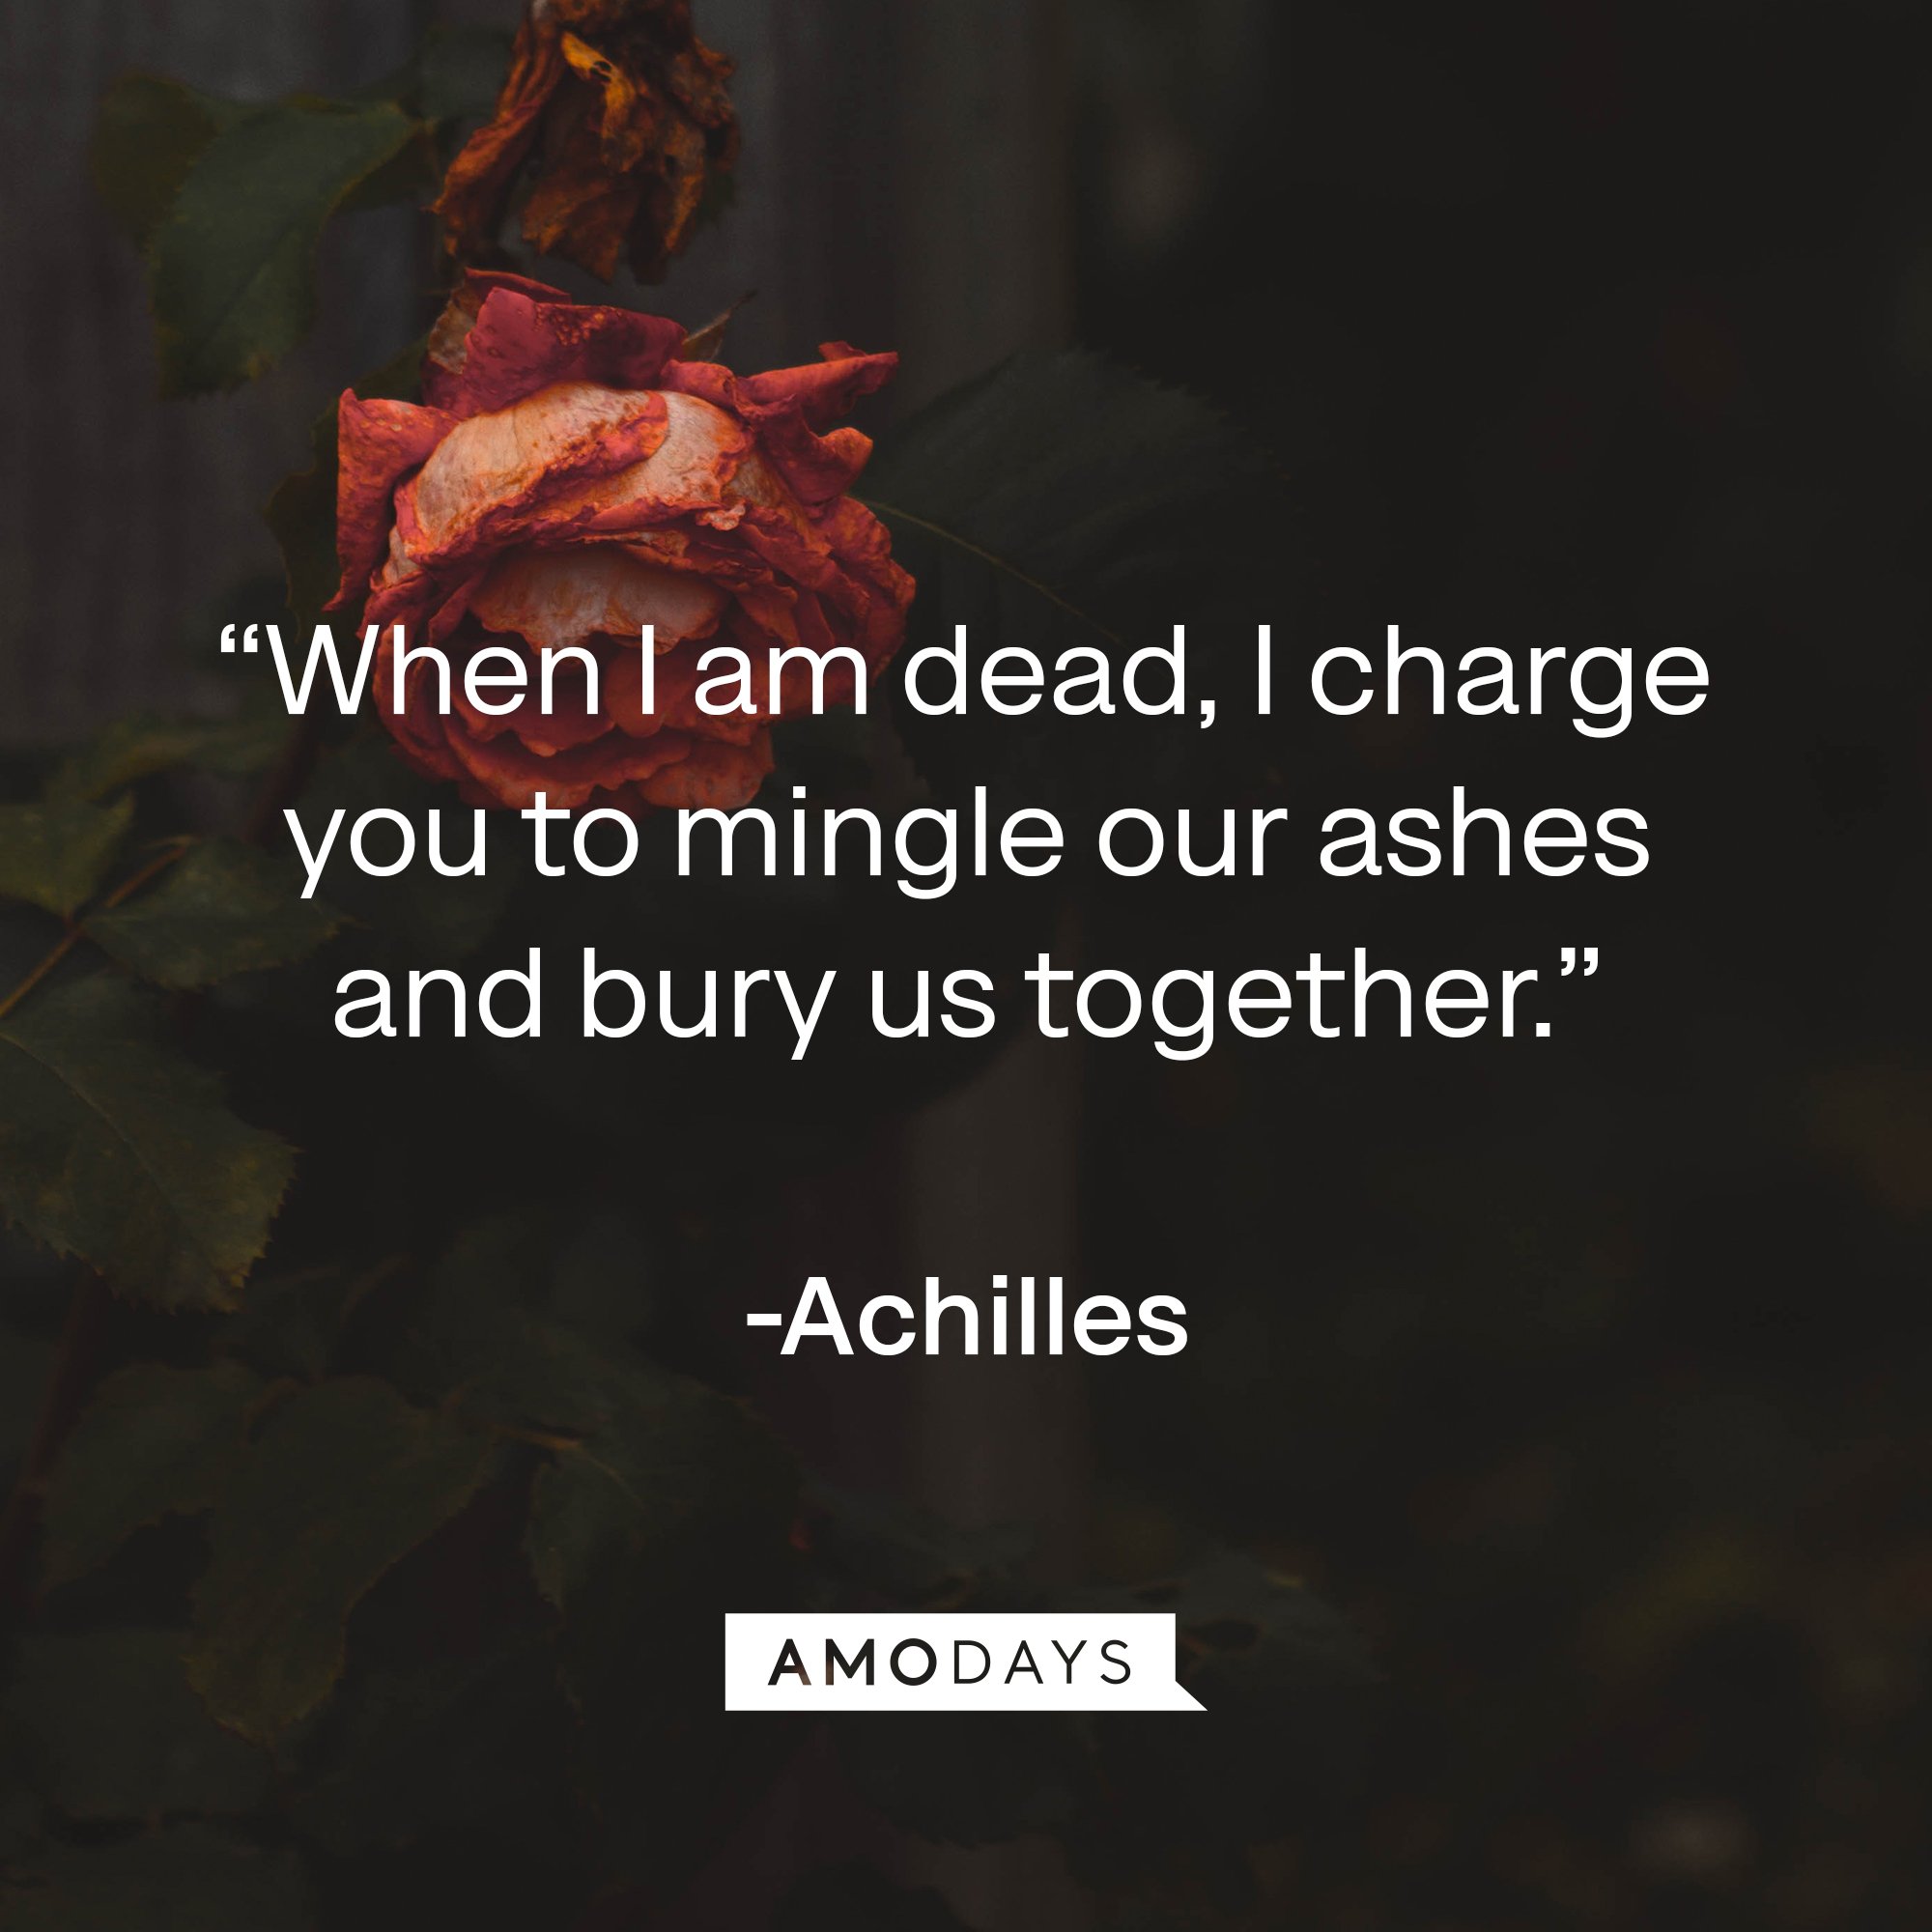 Achilles's quote: “When I am dead, I charge you to mingle our ashes and bury us together.” | Image: AmoDays